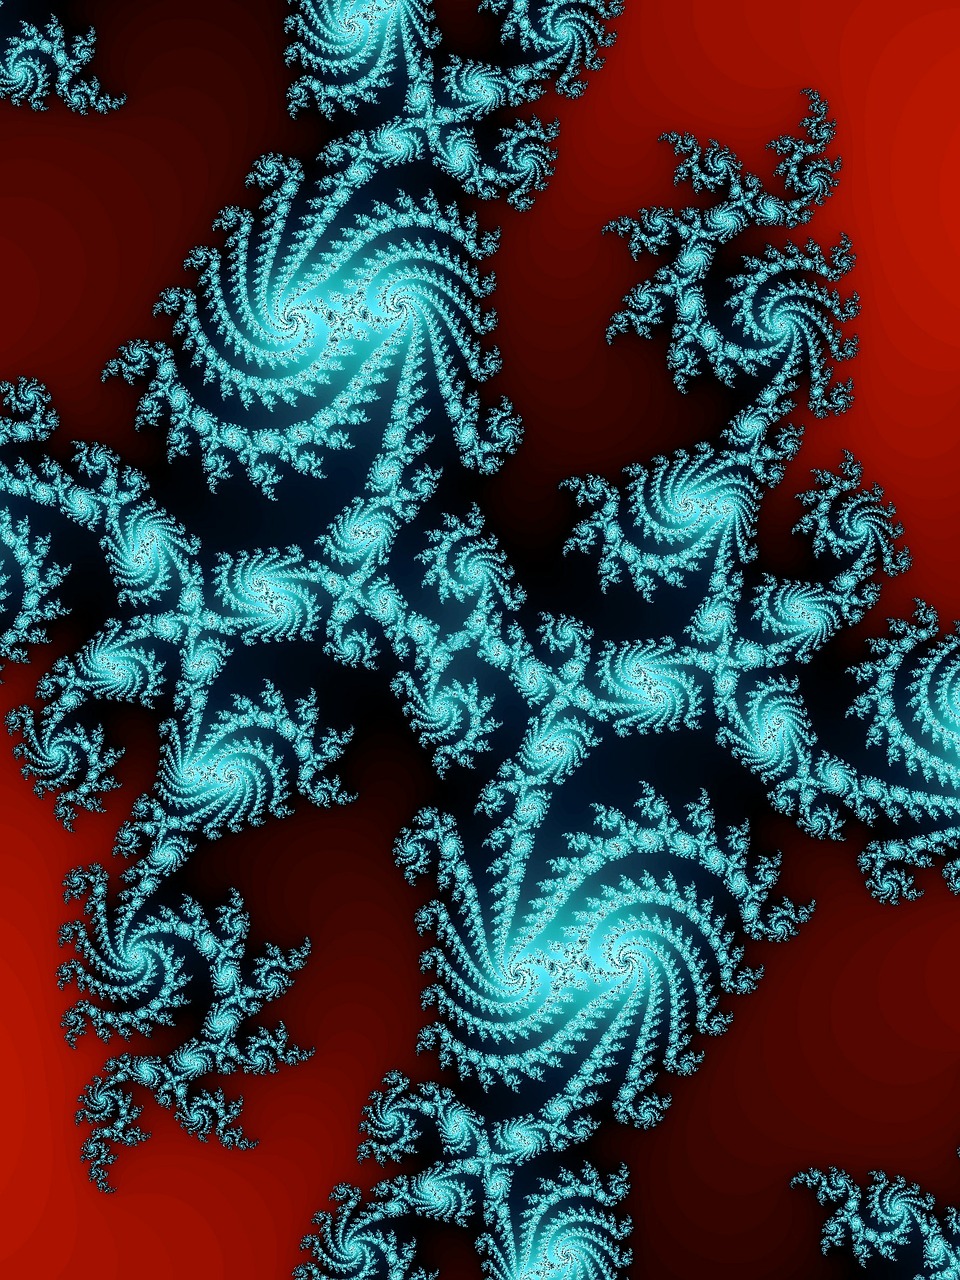 fractal spiral abstract pattern free photo